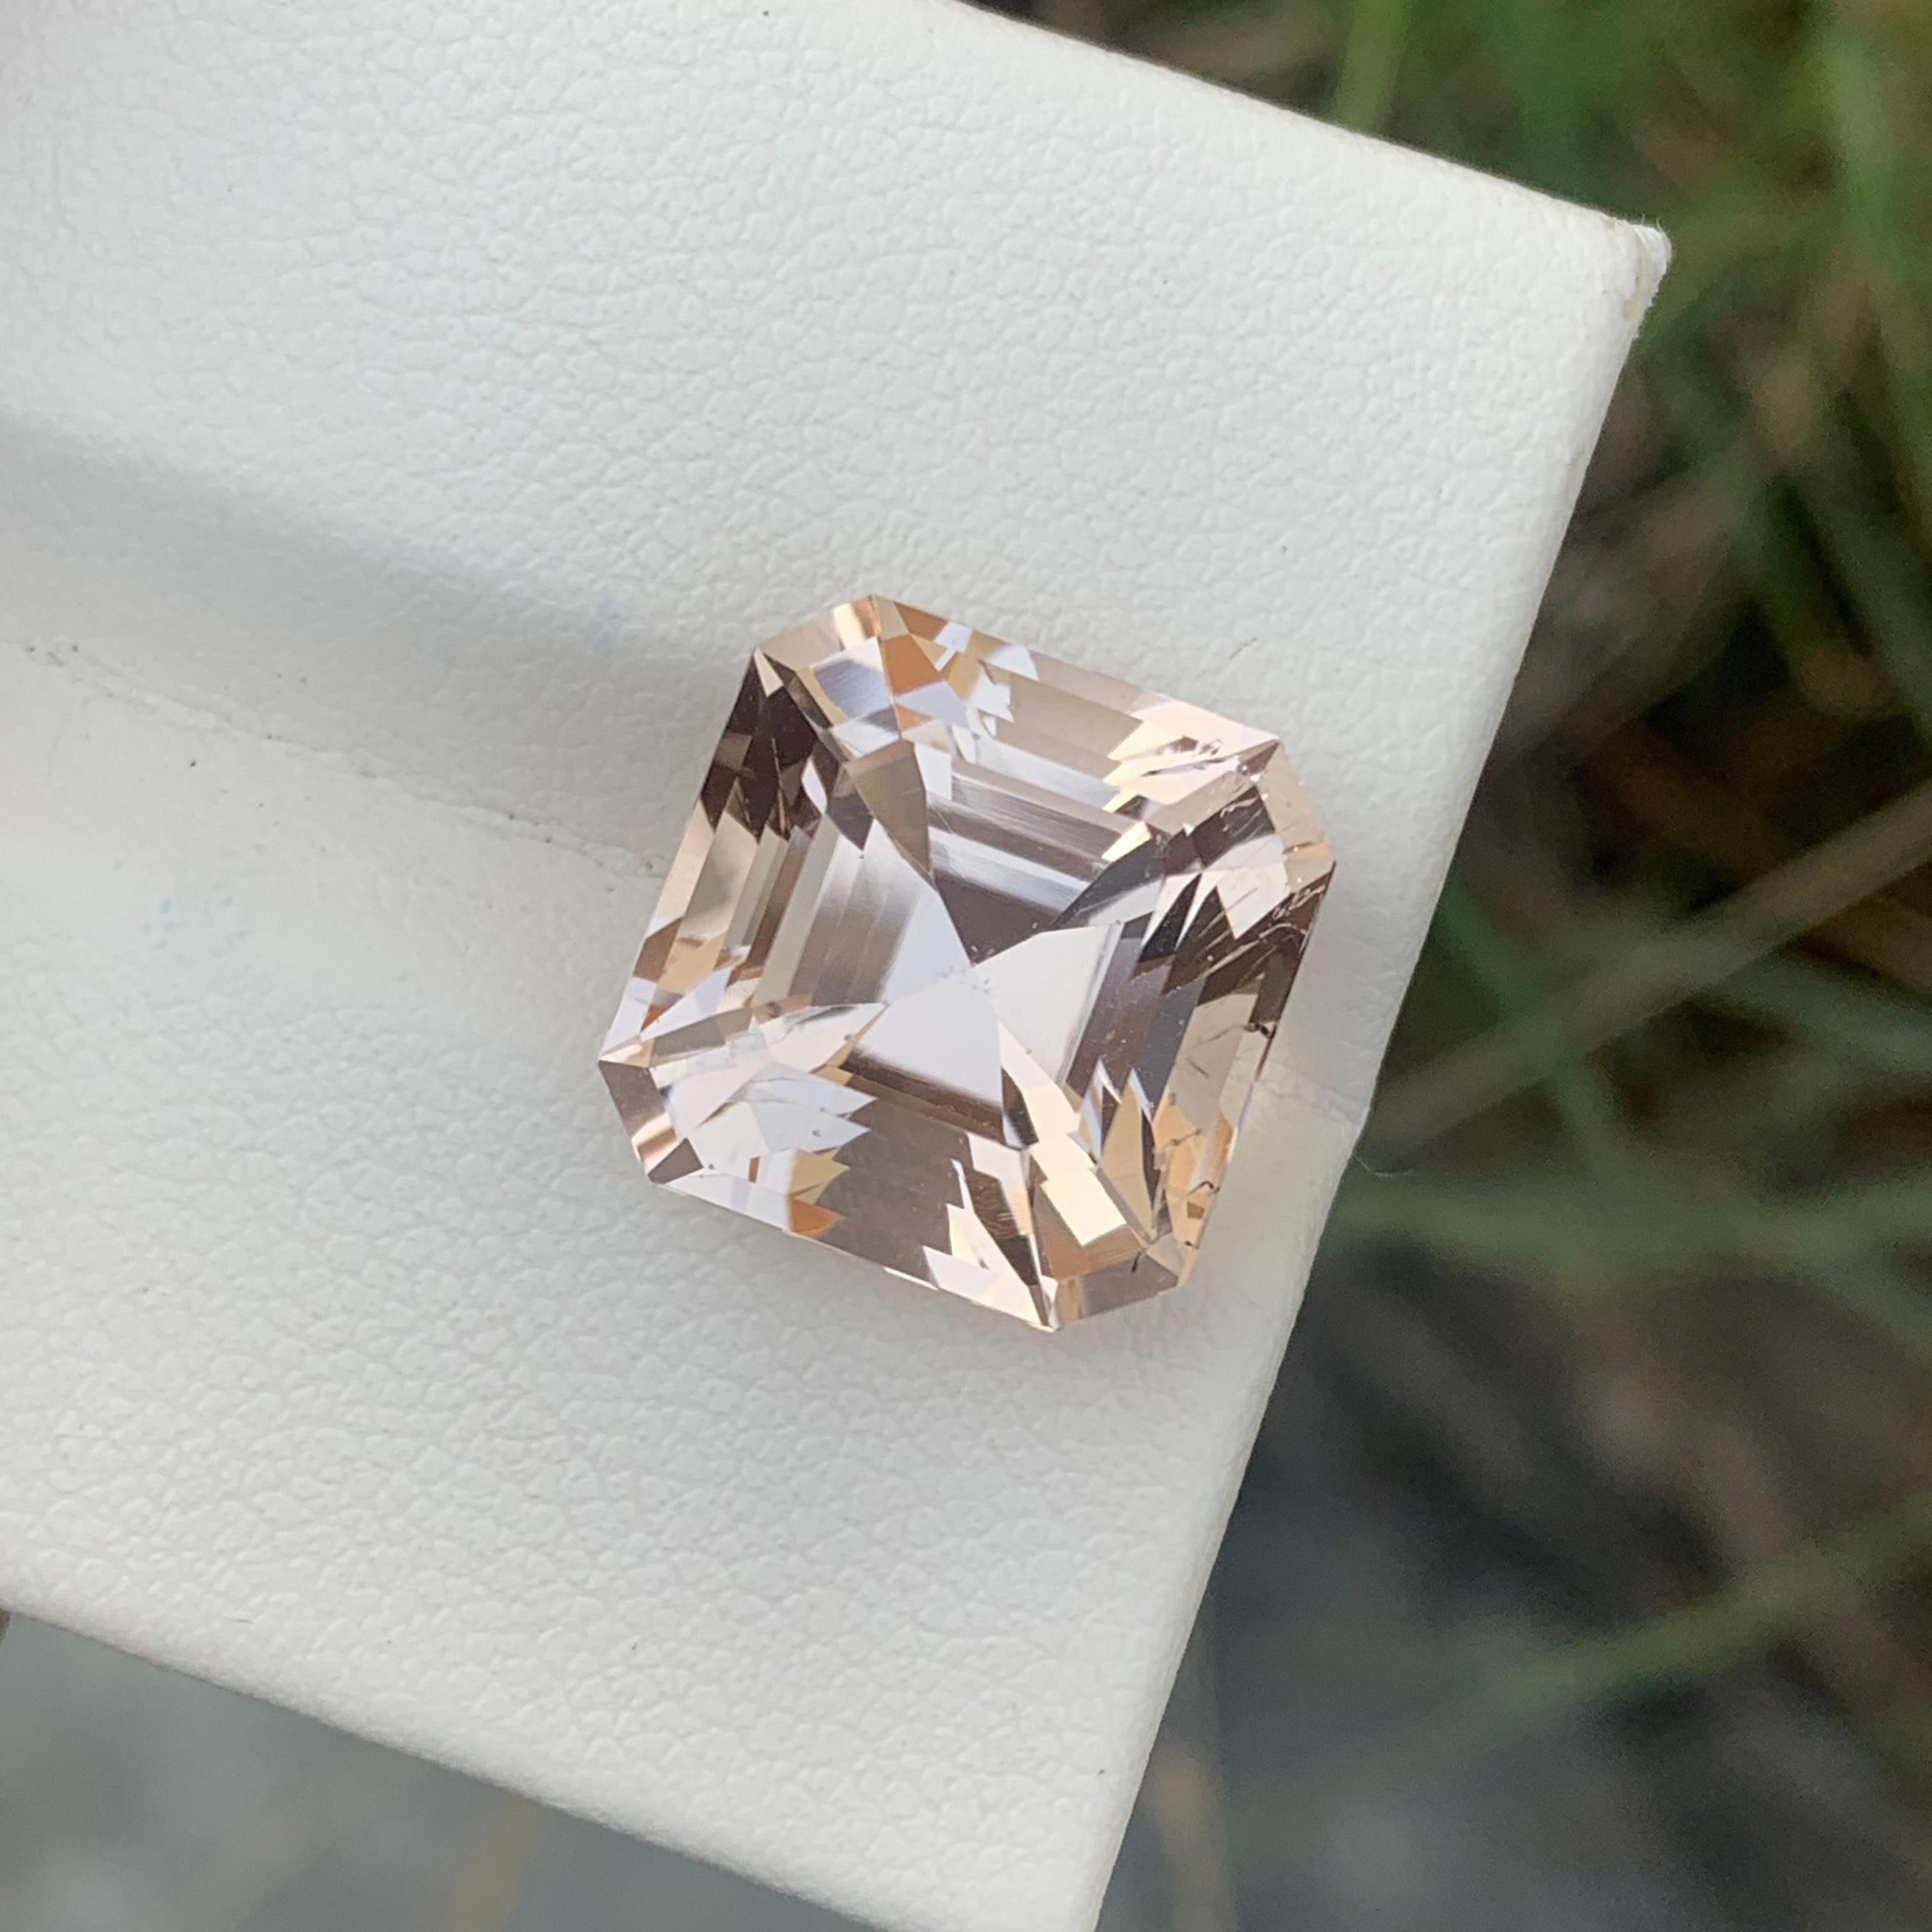 12.15 Carats Natural Loose Imperial Morganite Asscher Cut Gem For Jewelry Making 4